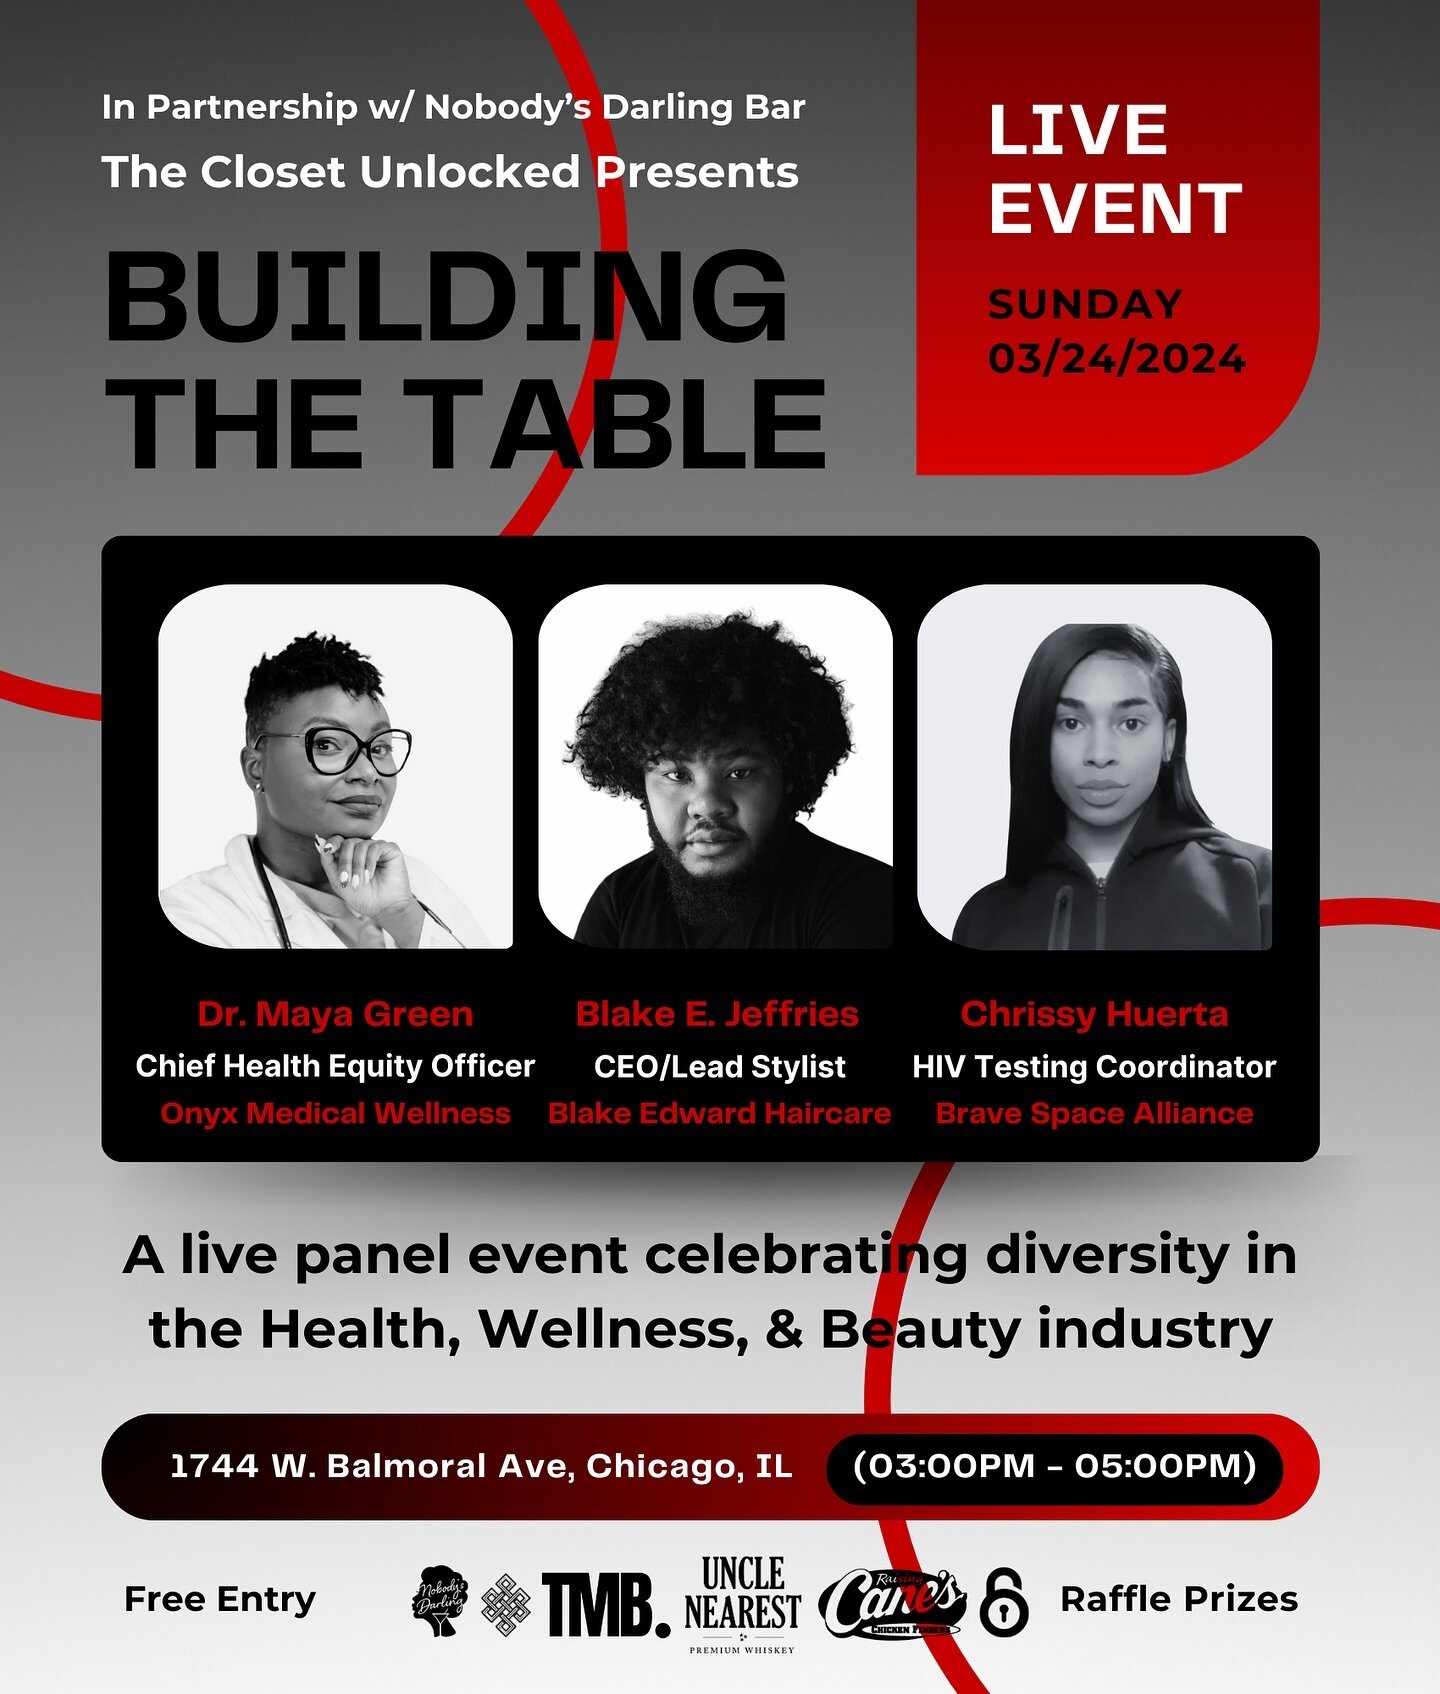 We&rsquo;re excited to kick it with y&rsquo;all later 🥳

We&rsquo;ll be Celebrating Culture and Diversity in Chicago!

Join us today (Sunday, March 24th) at 3pm for the 1st part of our &lsquo;Building the Table&rsquo; live panel series hosted at @no